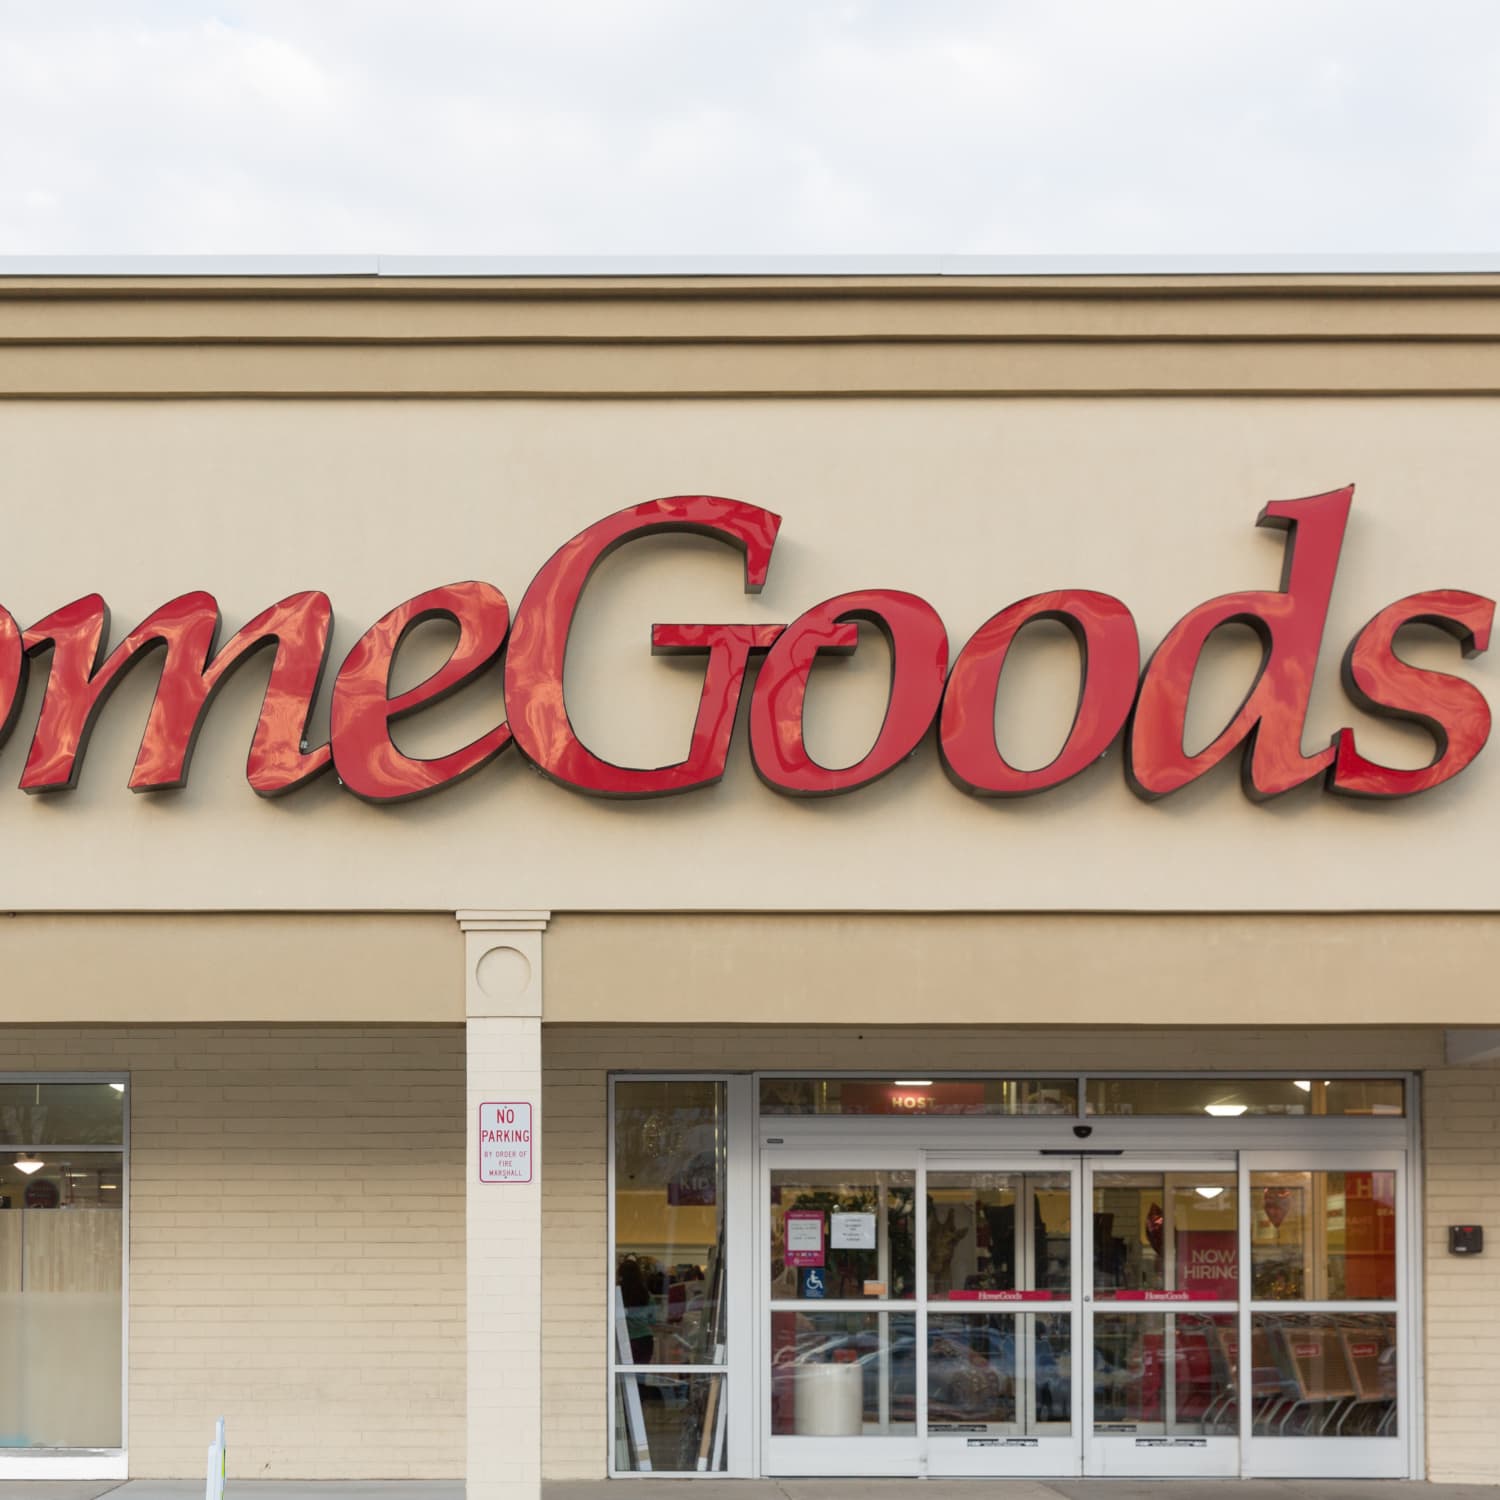 HomeGoods gives up on online shopping to focus on physical stores